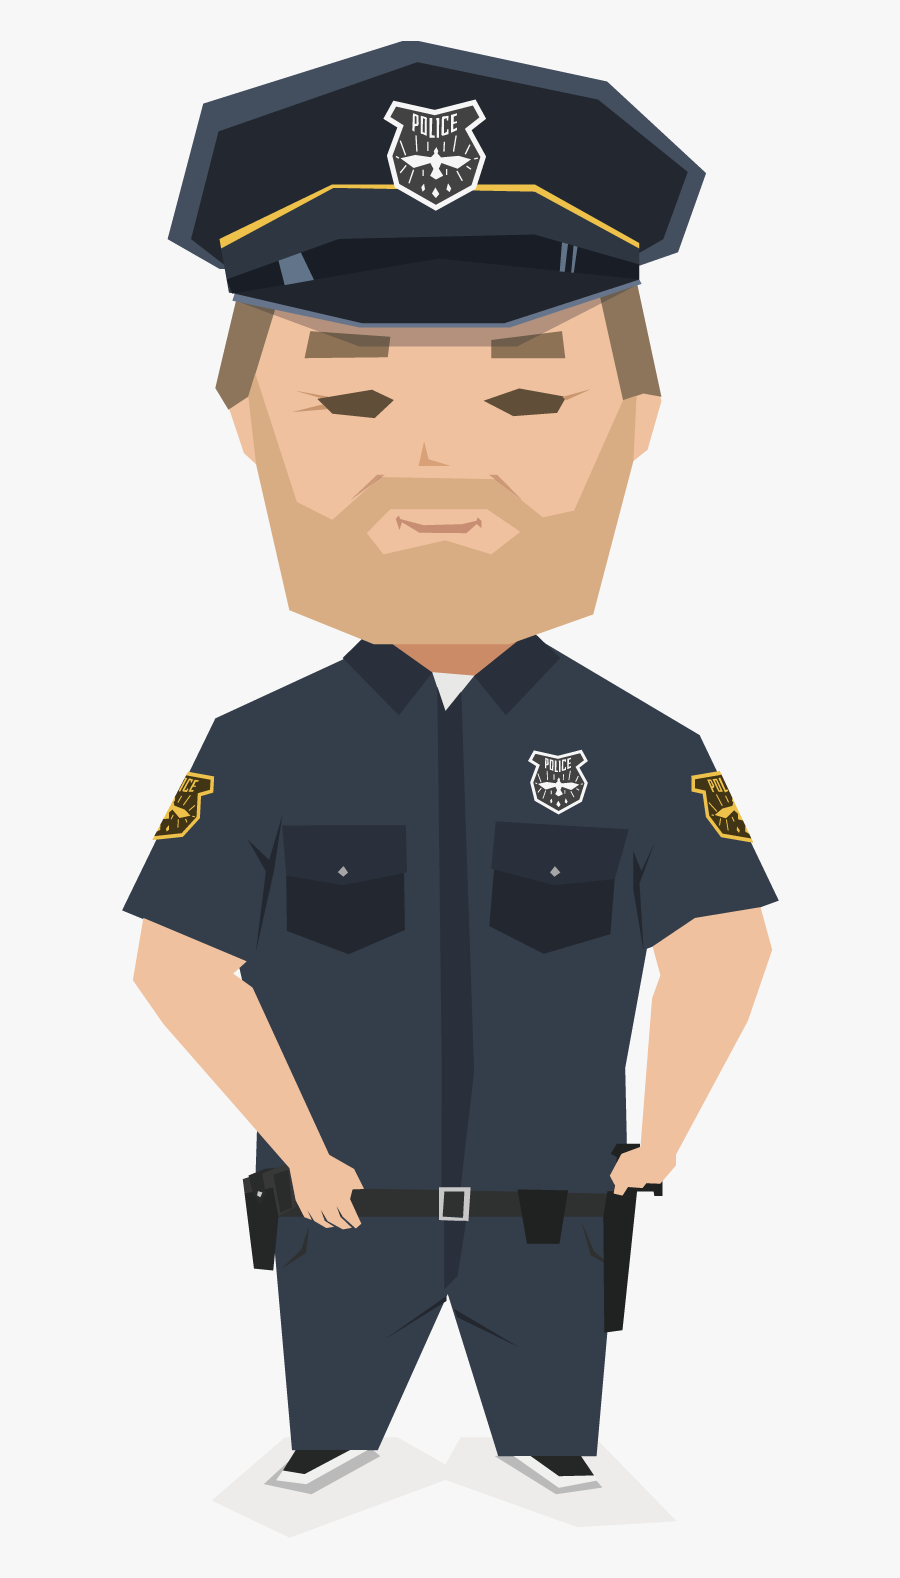 Police Officer Uniform Security Guard - Security Guard Long Handcuff, Transparent Clipart